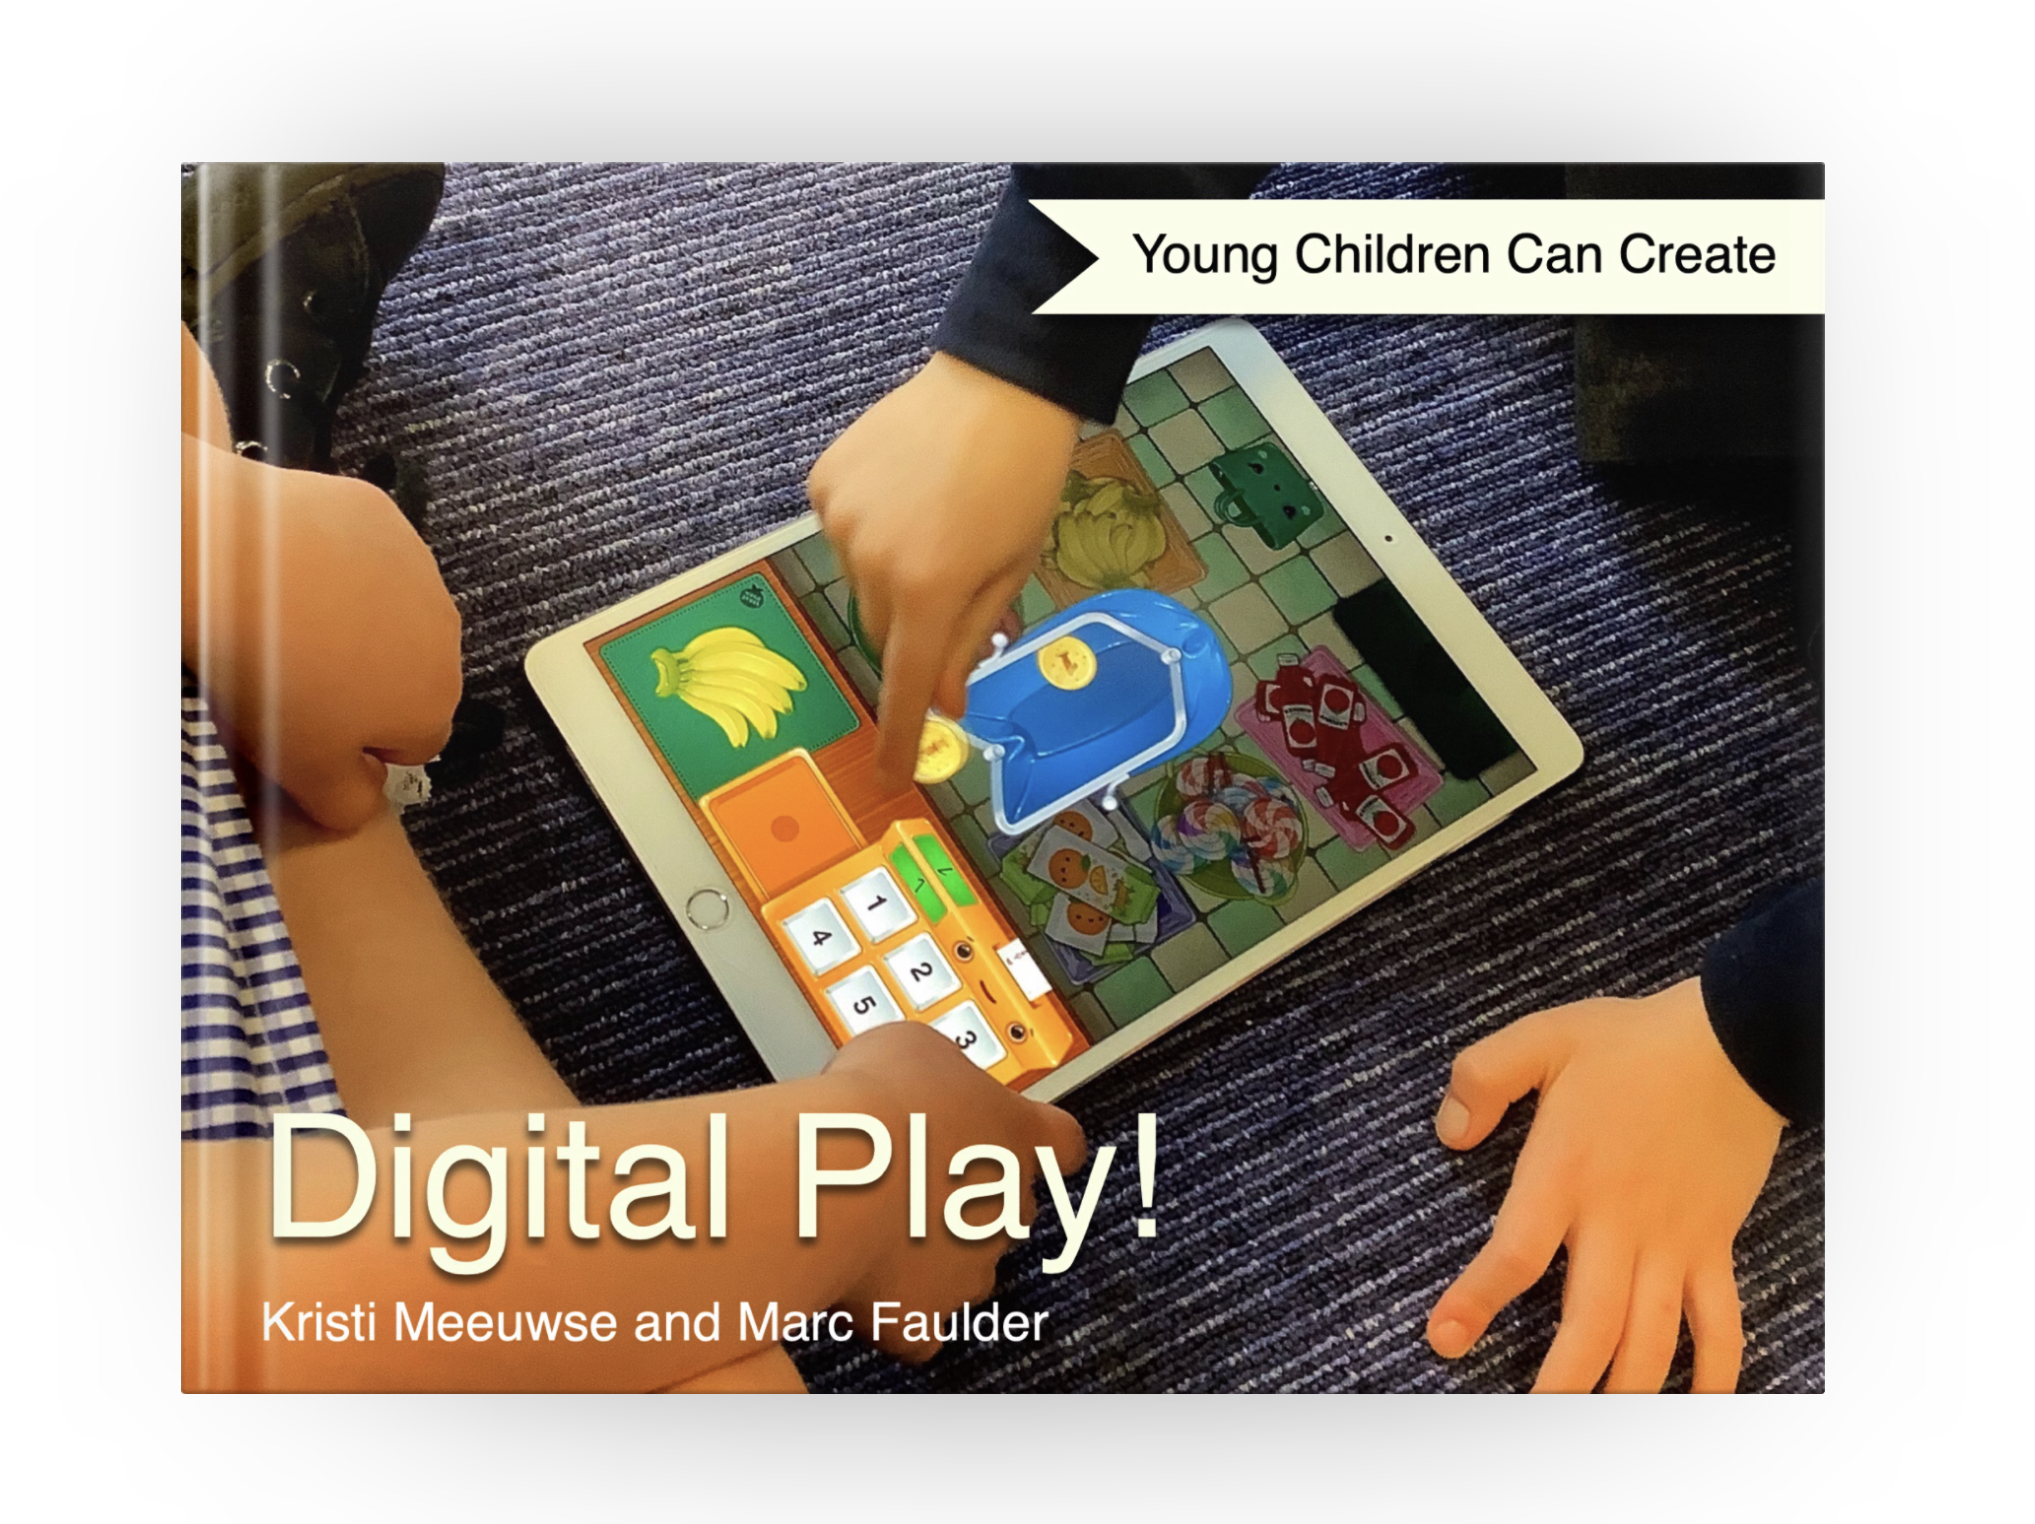 Cover of Digital Play book showing young children sharing Toca Boca Store app.